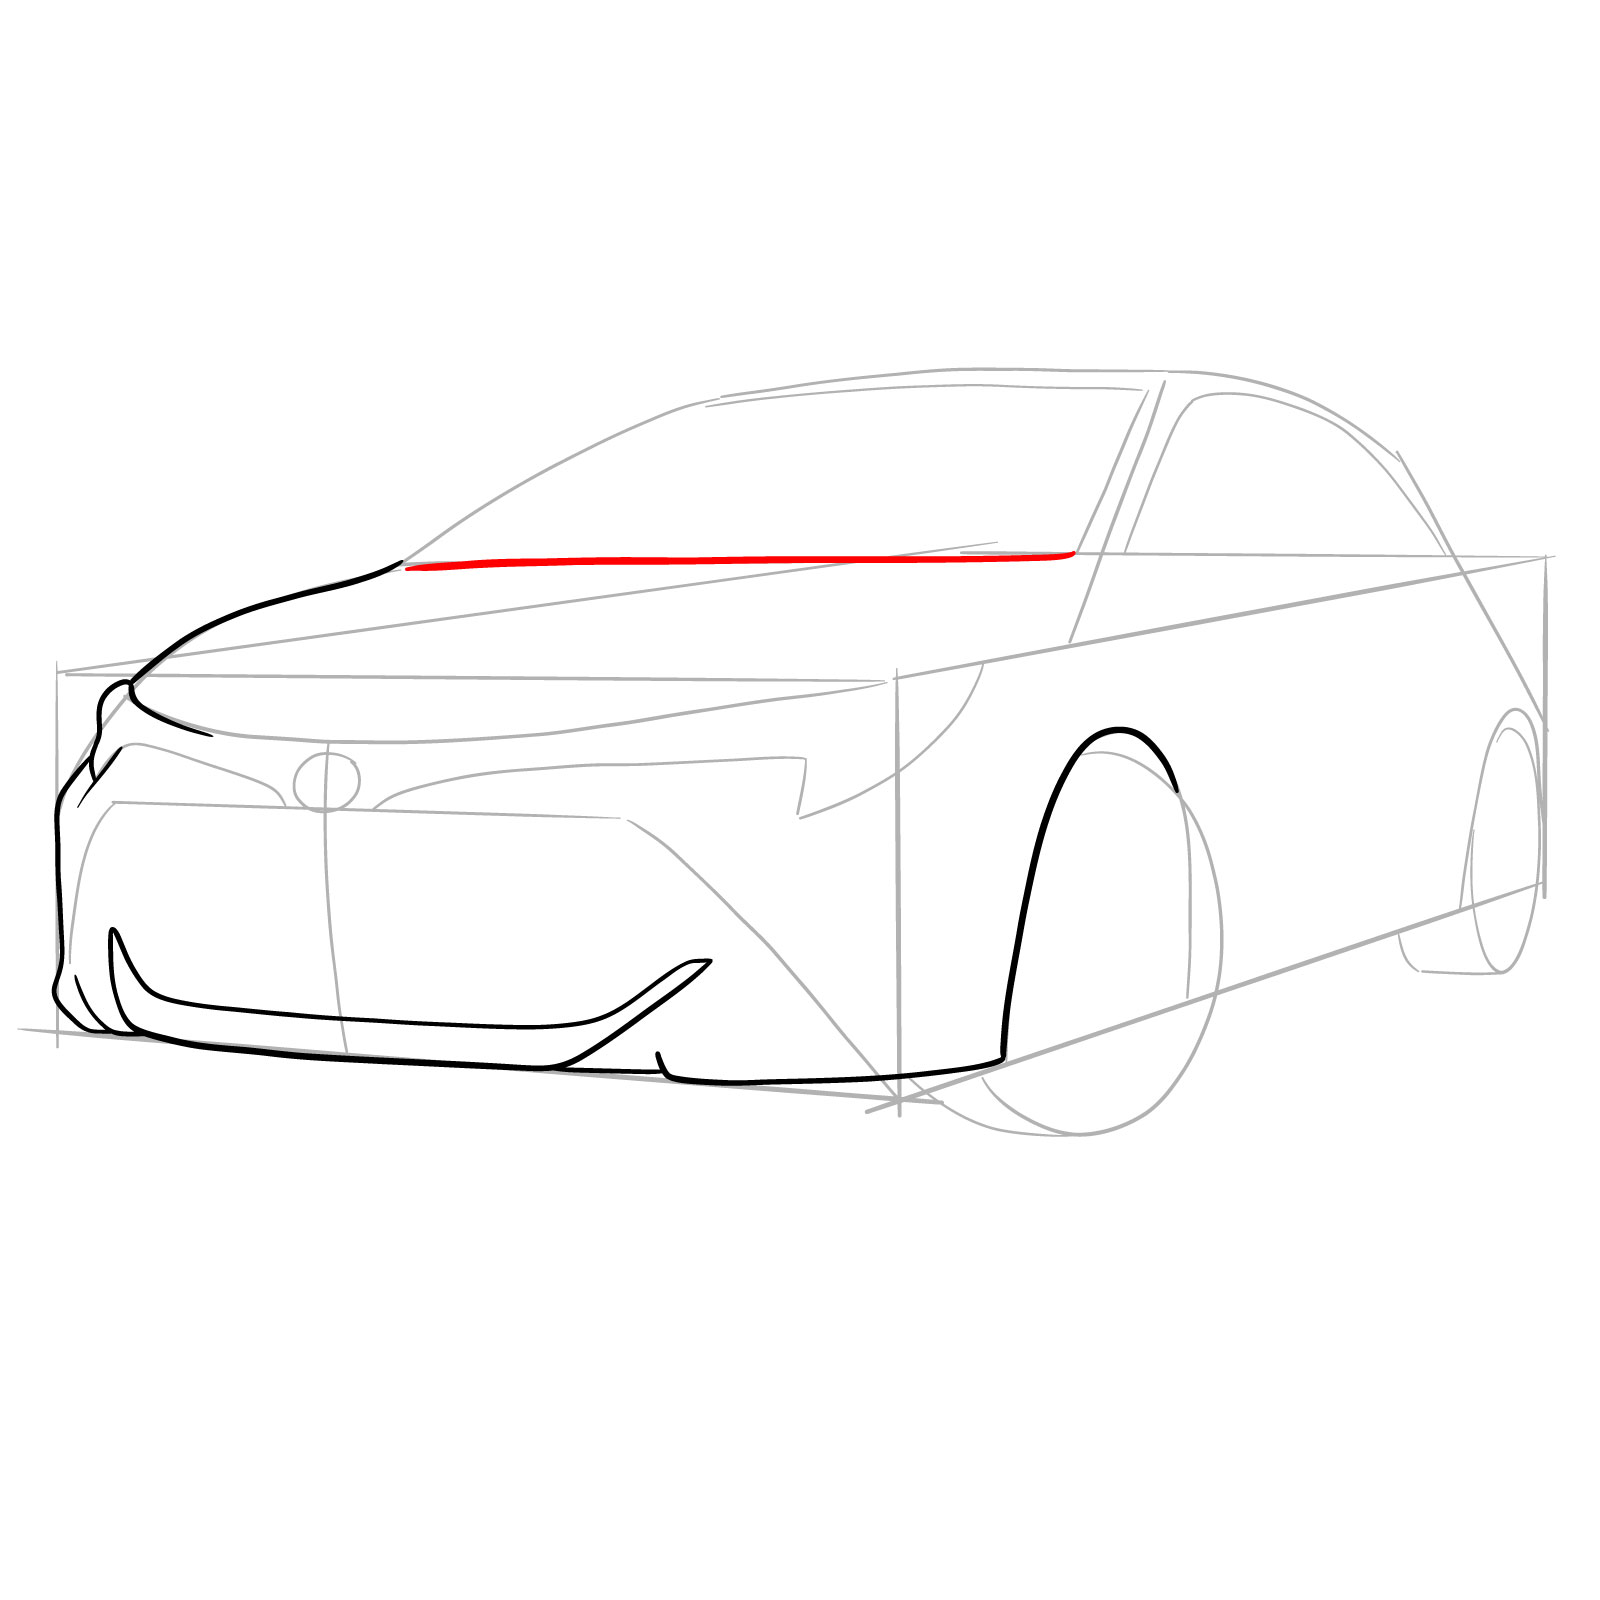 How to draw a 2021 Toyota Corolla - step 10